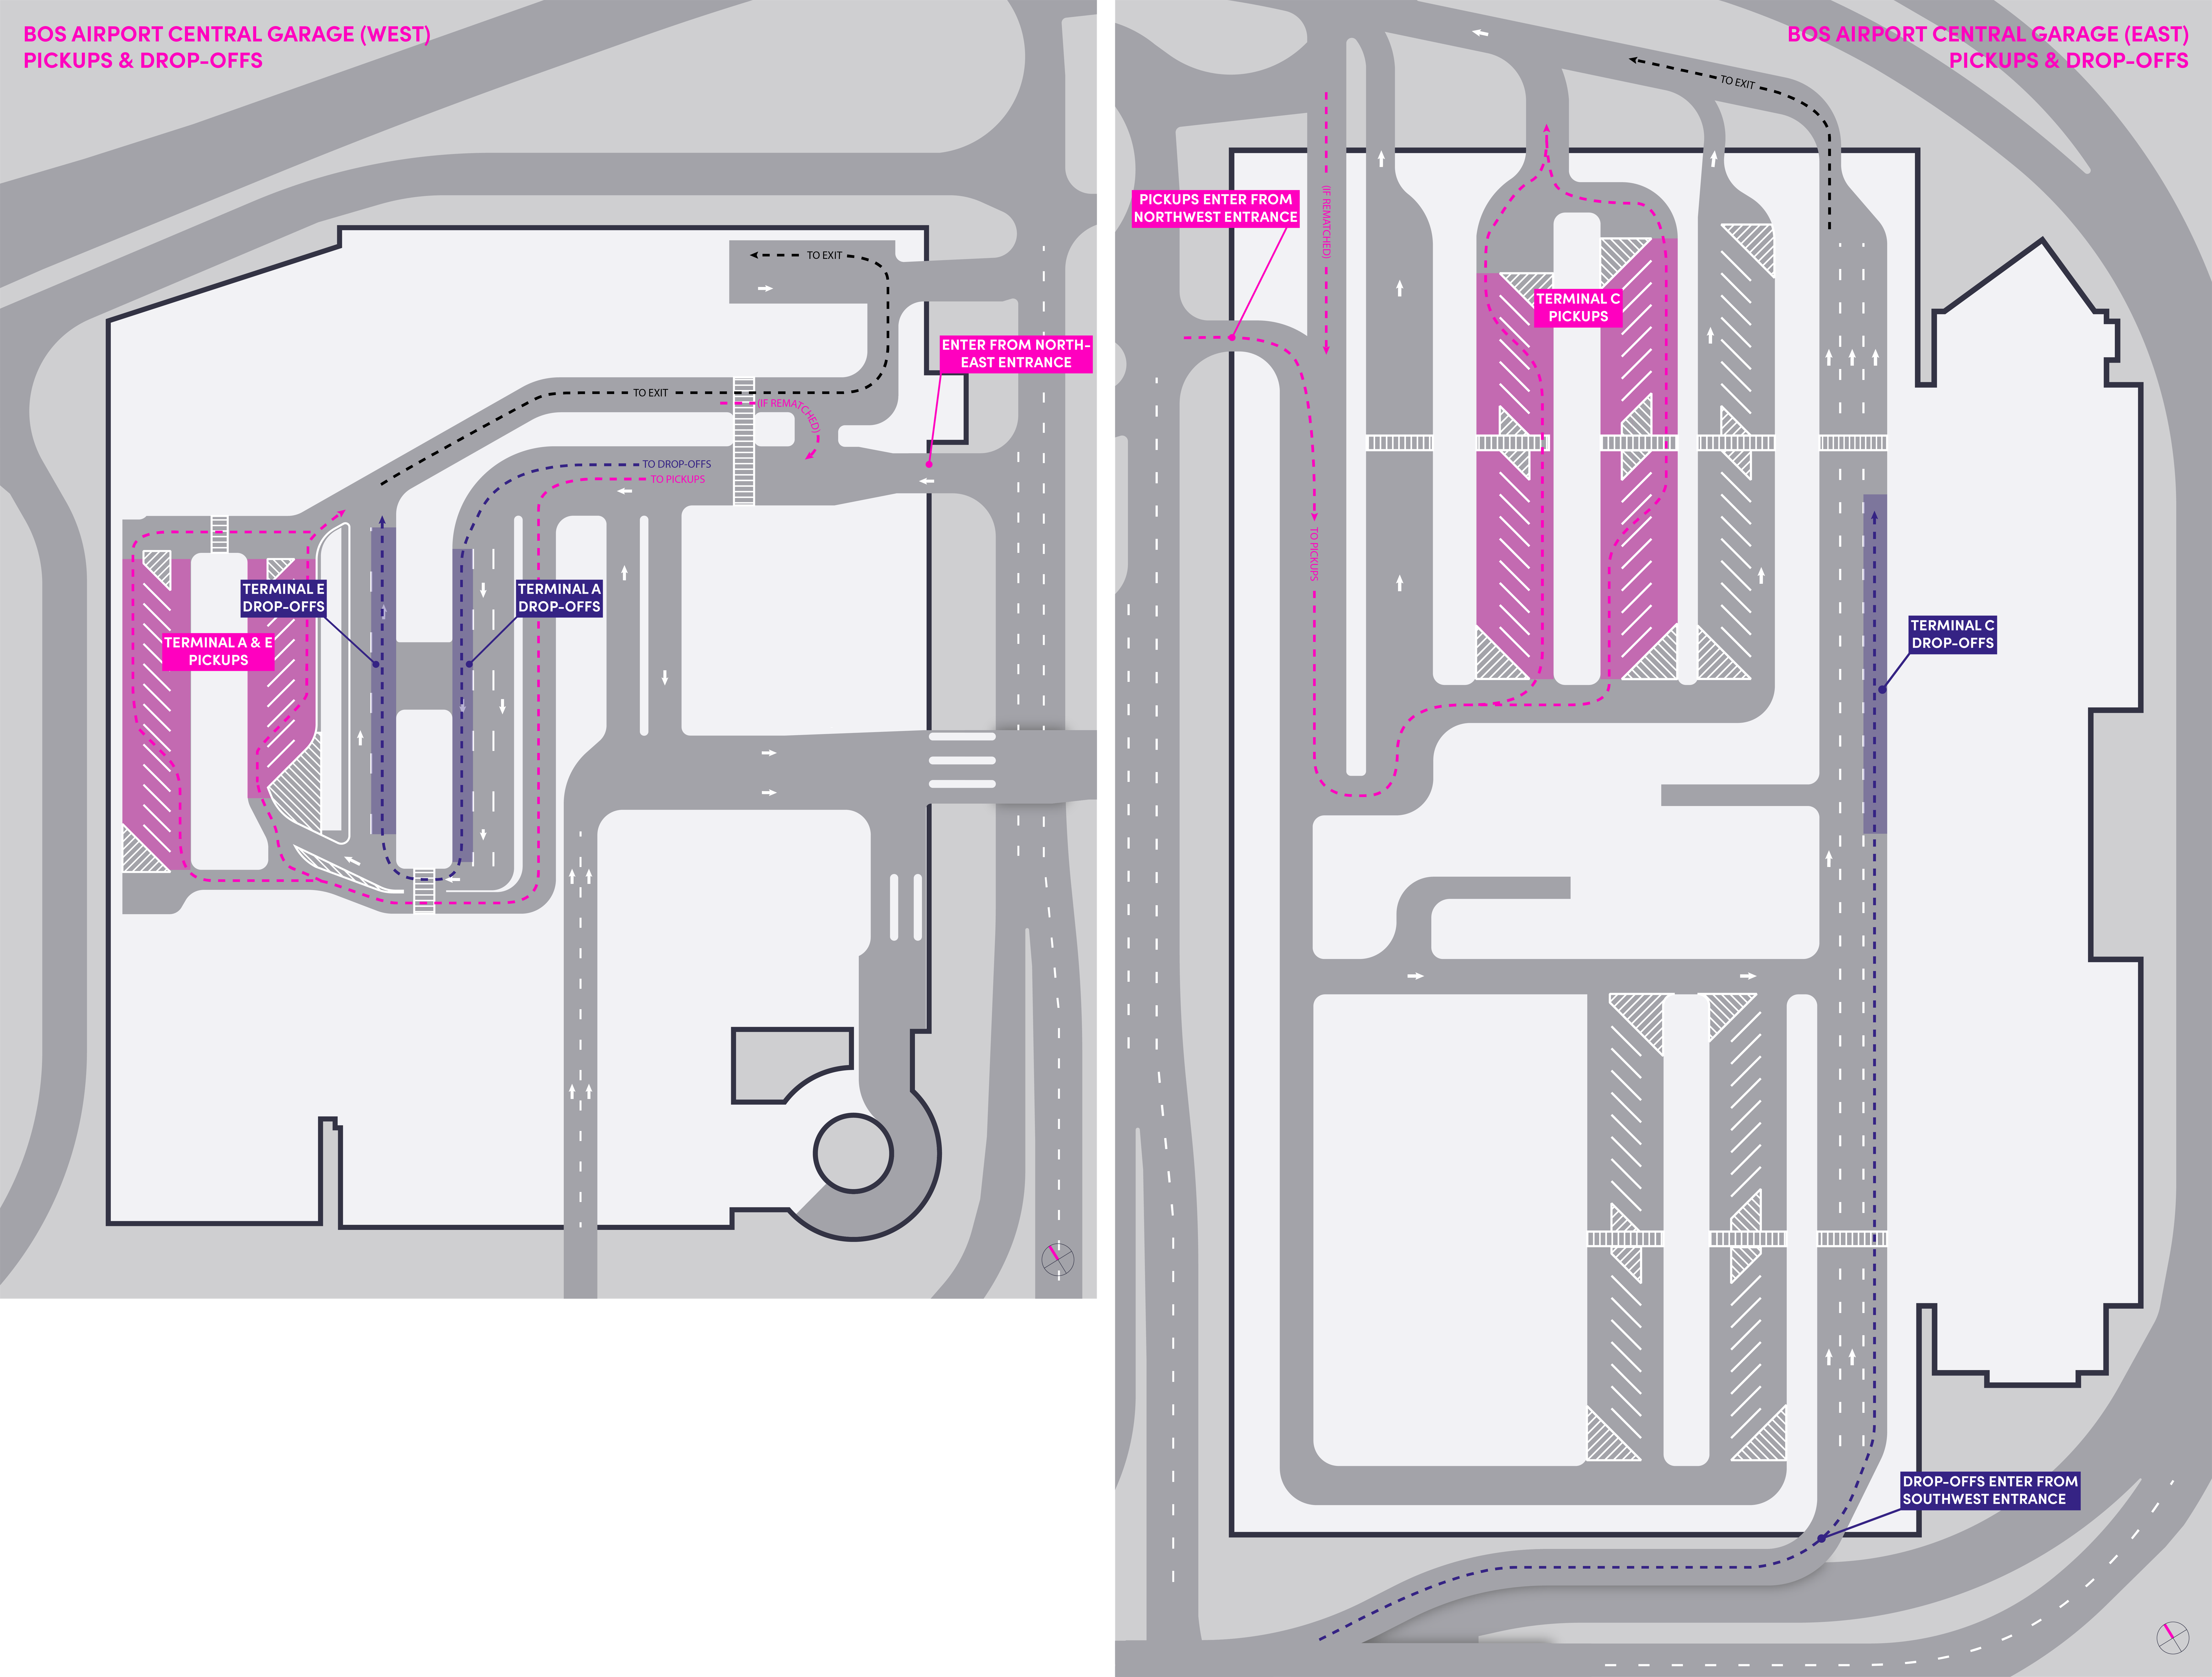 Map of the Central garage (west) and Central garage at Boston Logan International Airport.